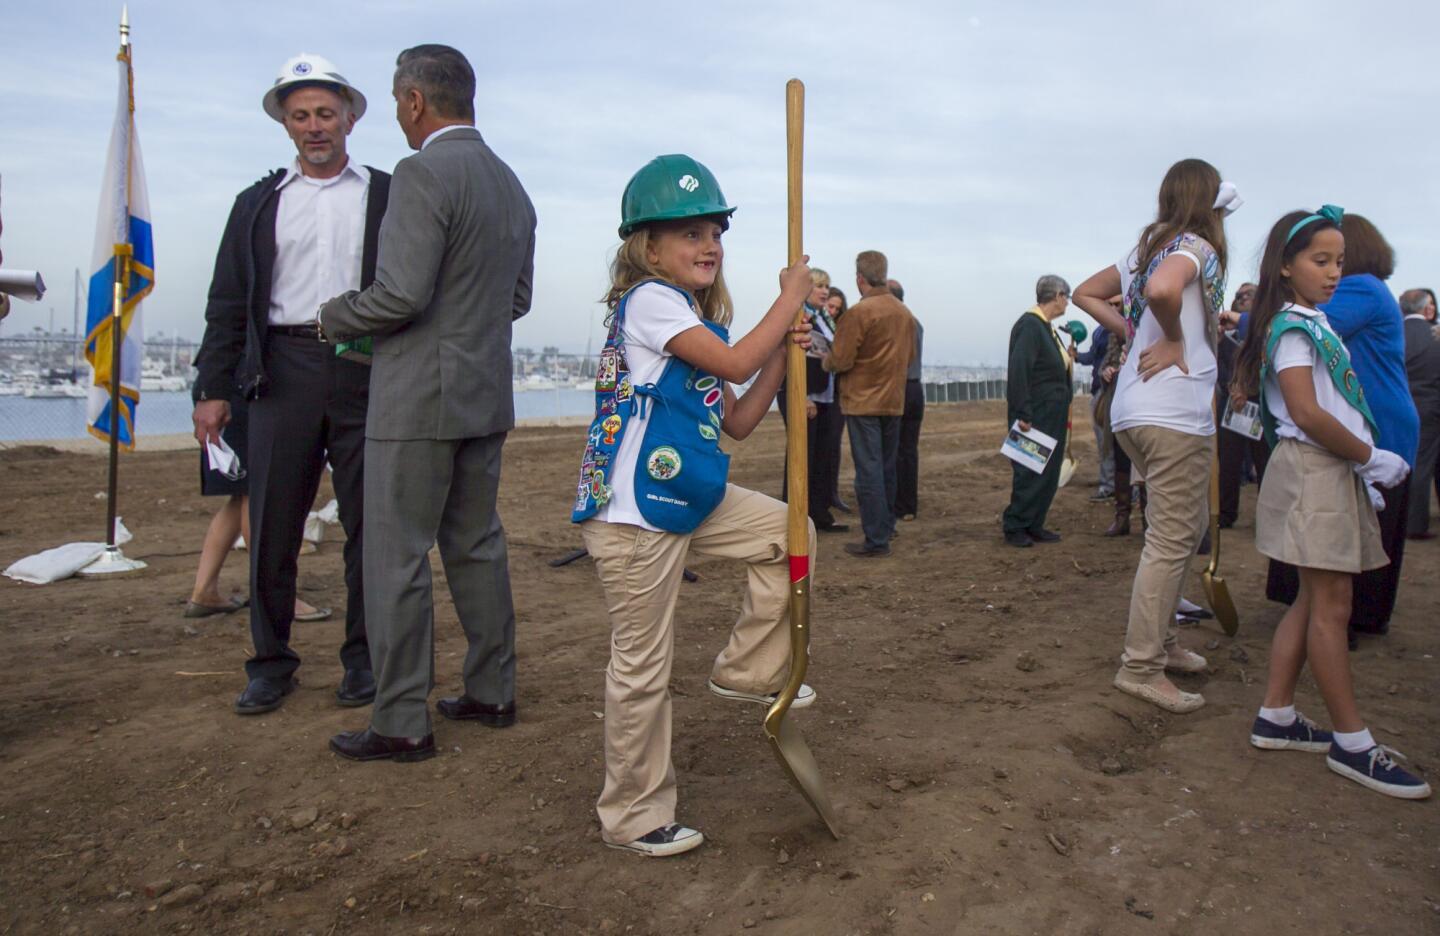 Girl Scout Frankie Paalman poses for a photo op during the groundbreaking ceremony for Marina Park on Balboa Peninsula on Tuesday, February 11. (Scott Smeltzer, Daily Pilot)